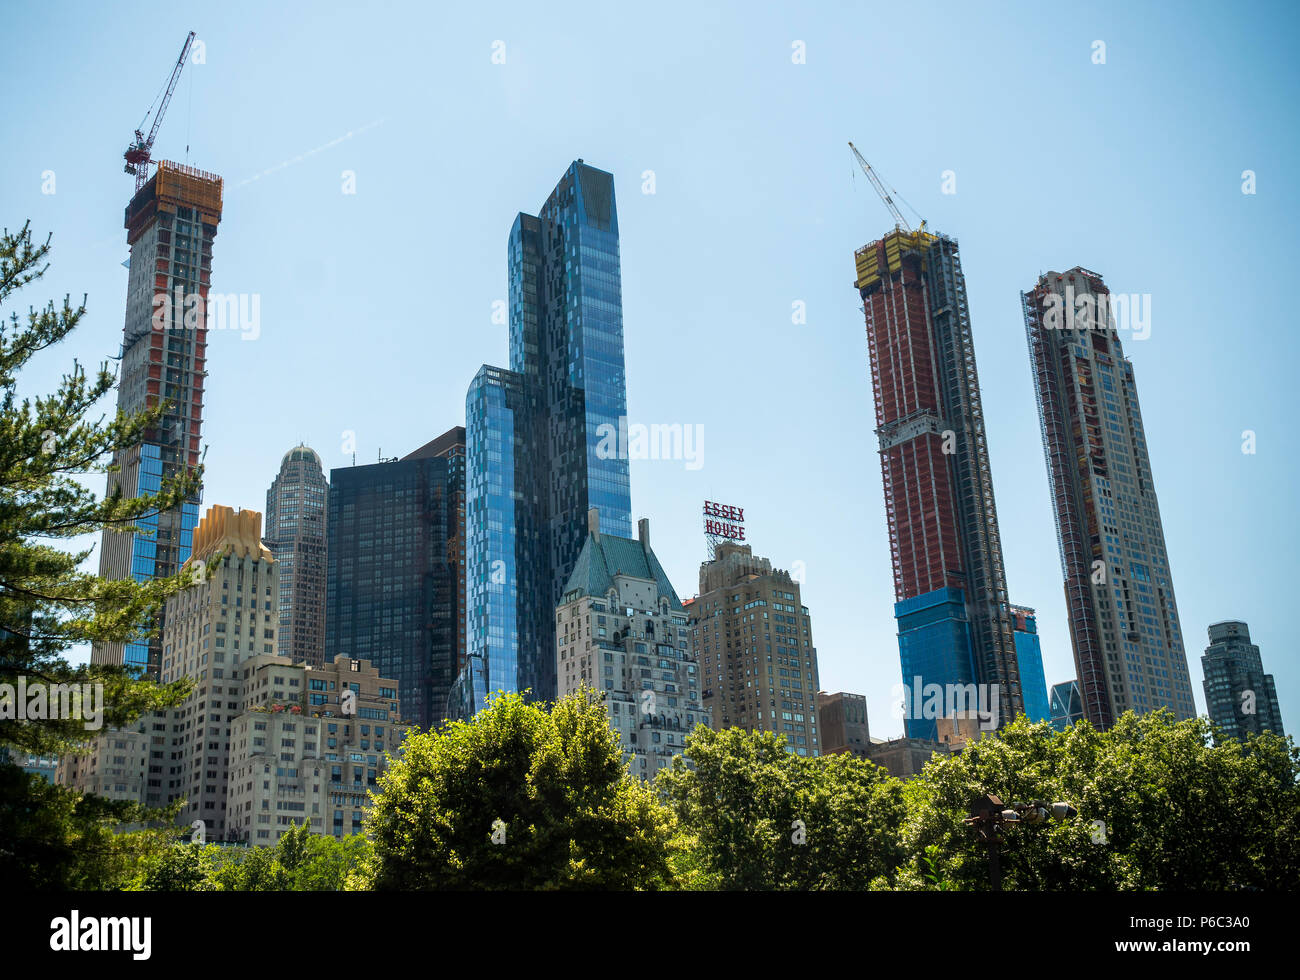 Skyscrapers constructed and under construction along the West 57th Street corridor in Midtown Manhattan in New York destined a shadows over Central Park, seen on Saturday, June 16, 2018. A recent study reported that the One57 and other proposed and under construction 'mega-towers' for the 'Ã¼ber-rich' over 1000 feet will cast long shadows at certain times of the year plunging parts of the southern section of the landmark Central Park in shadow. The buildings achieve their height by purchasing the air rights of smaller buildings. (Â© Richard B. Levine) Stock Photo